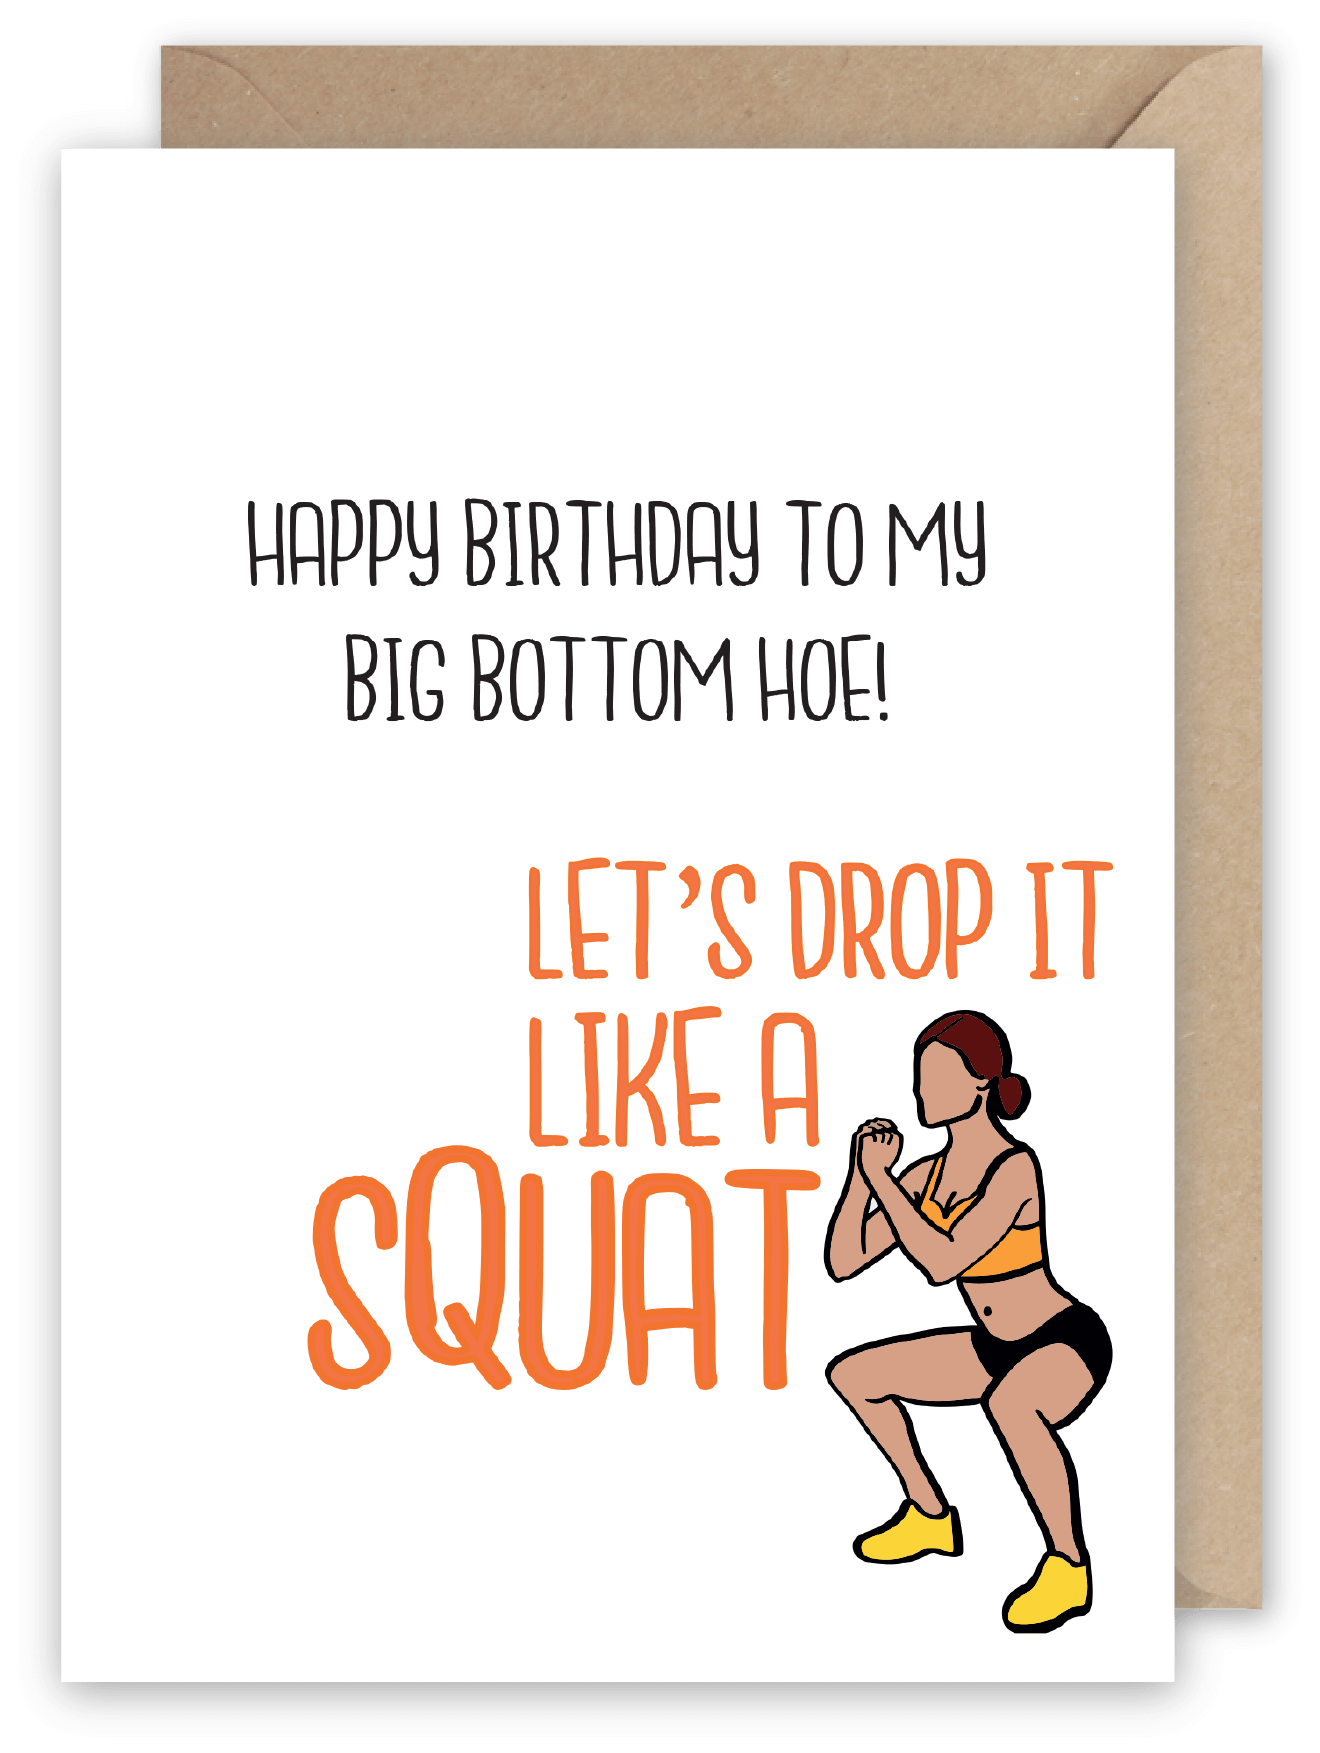 Happy Birthday to my Big Bottom Hoe - Greeting Card from Pheasant Plucker